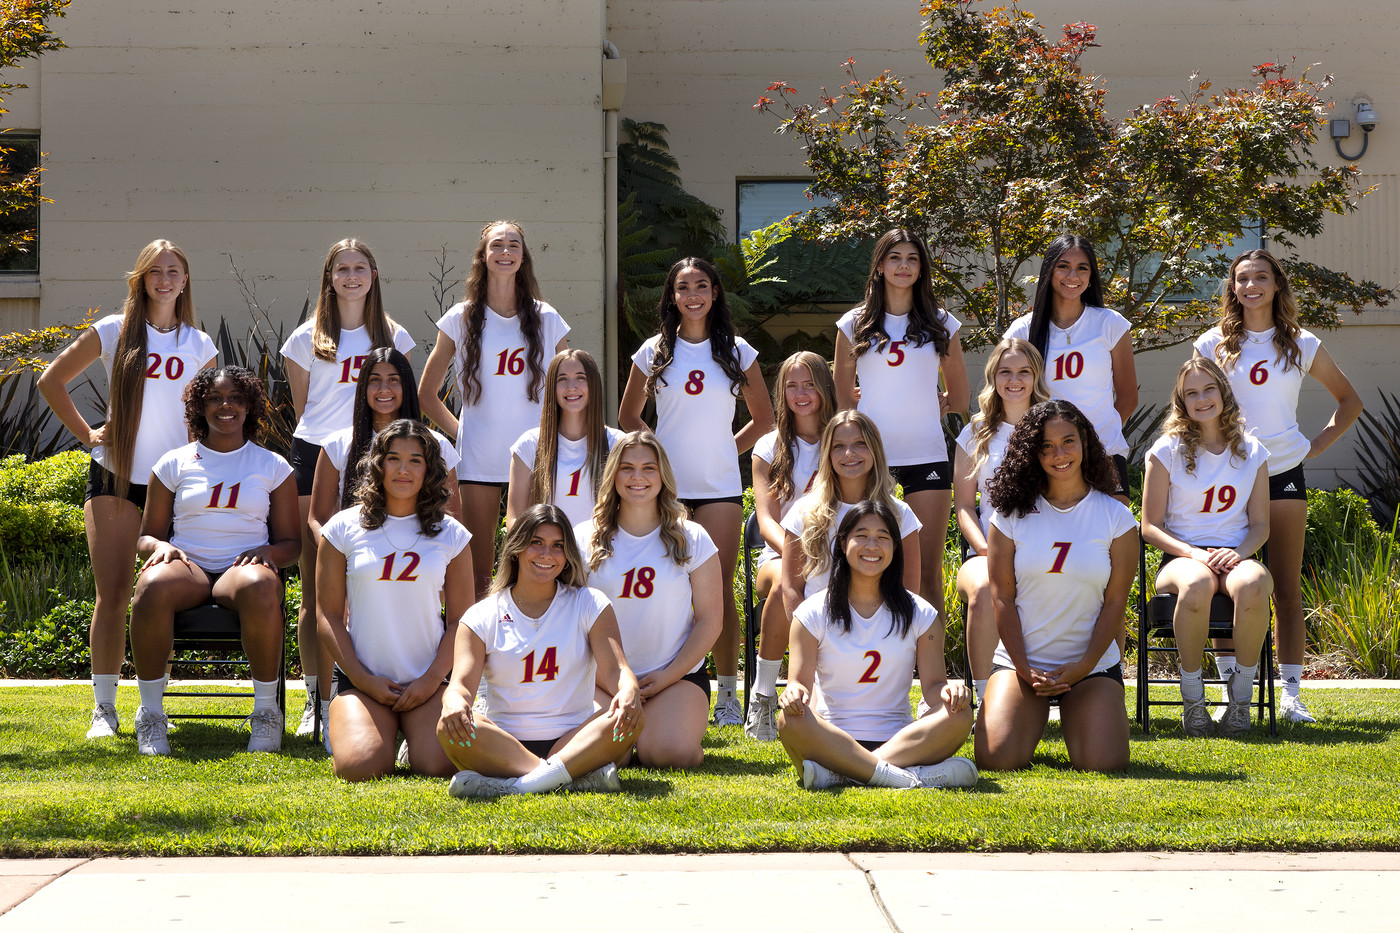 Volleyball season officially starts this Friday as they host Feather River (12pm) and Butte (4pm) in the North Gym